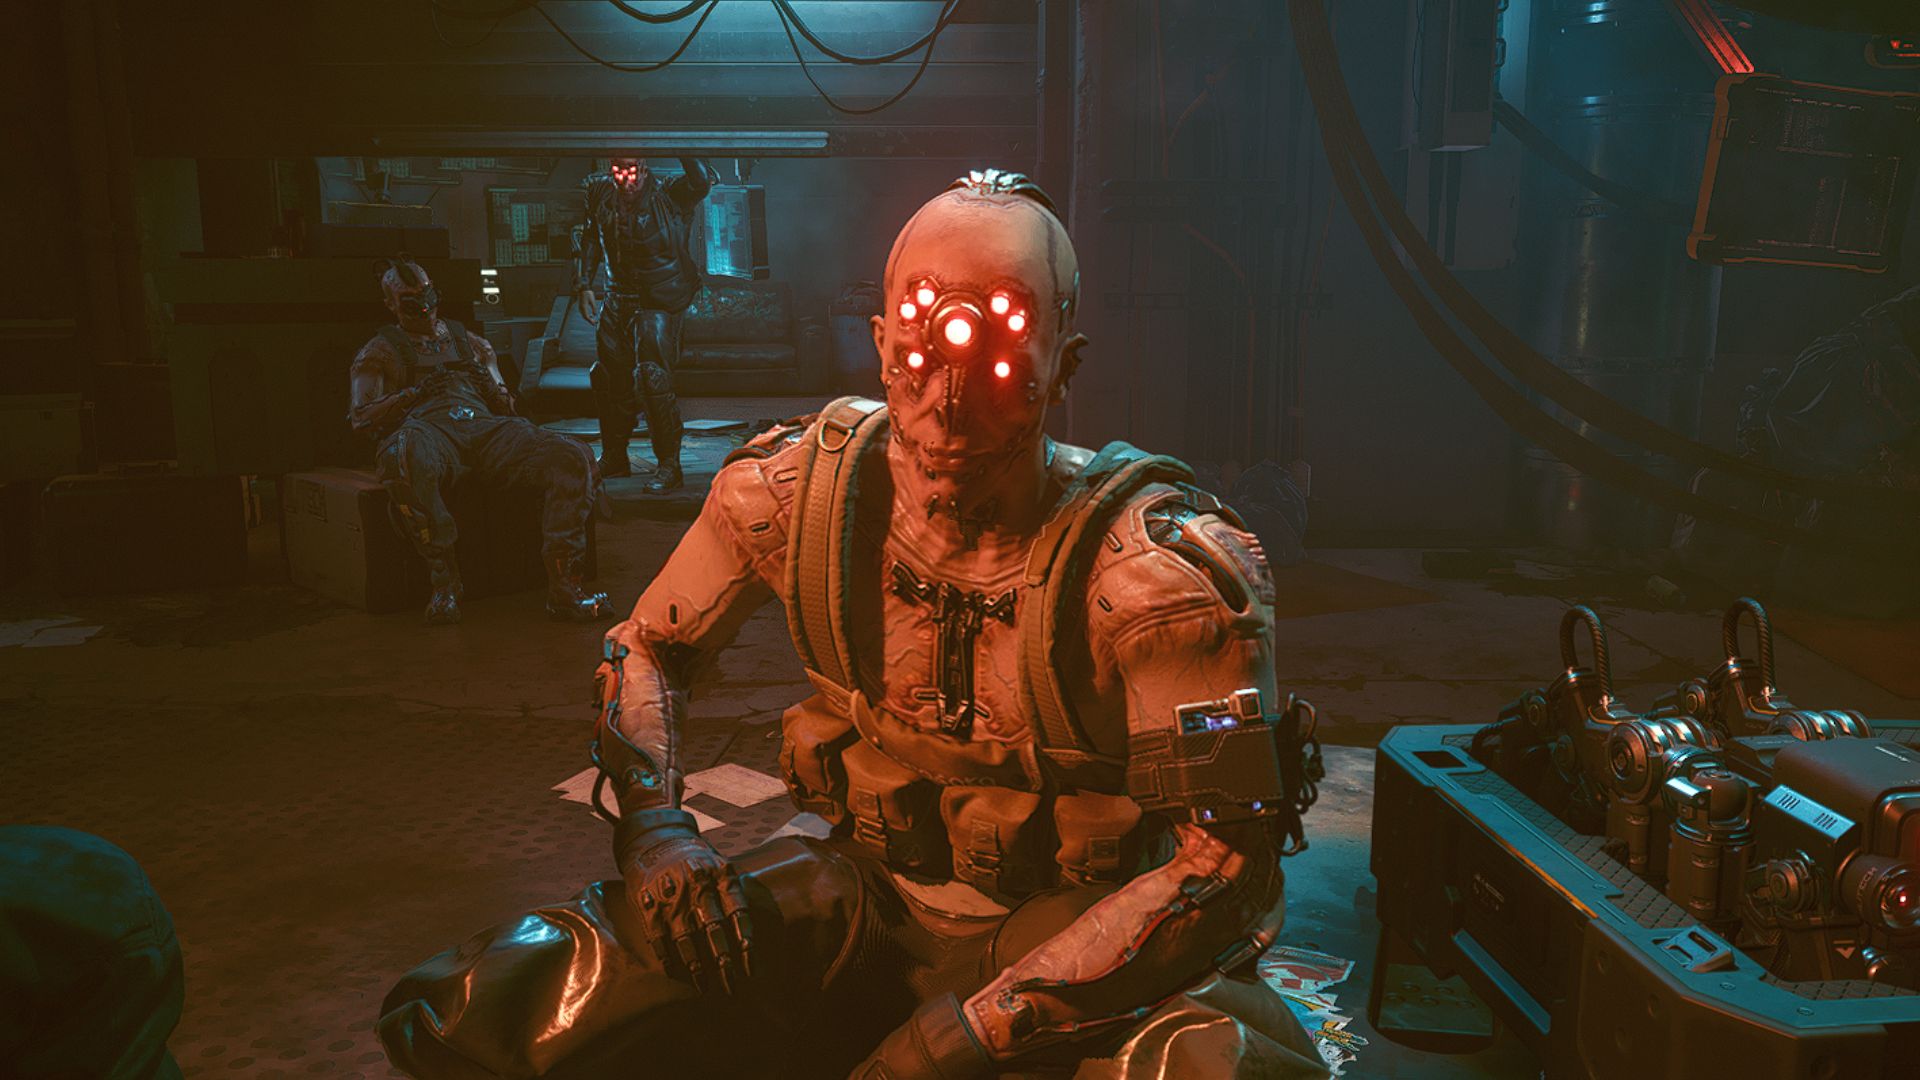 Your Cyberpunk 2077 cyberware options just went into overdrive